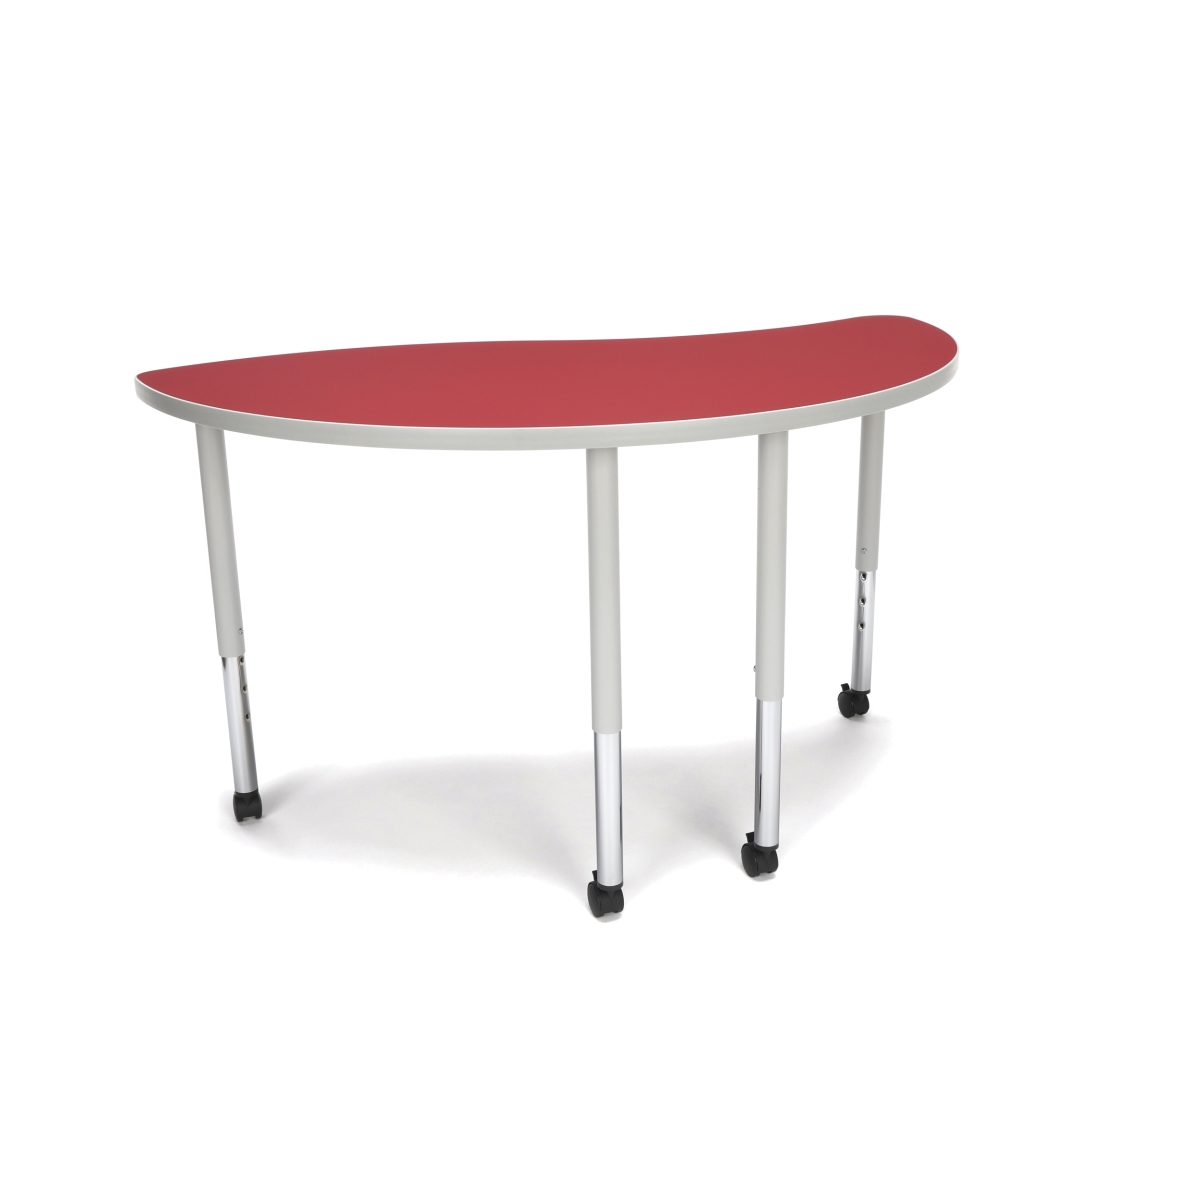 Ying-llc-red Adapt Series Ying Standard Table - 25-33 In. Height Adjustable Desk With Casters, Red